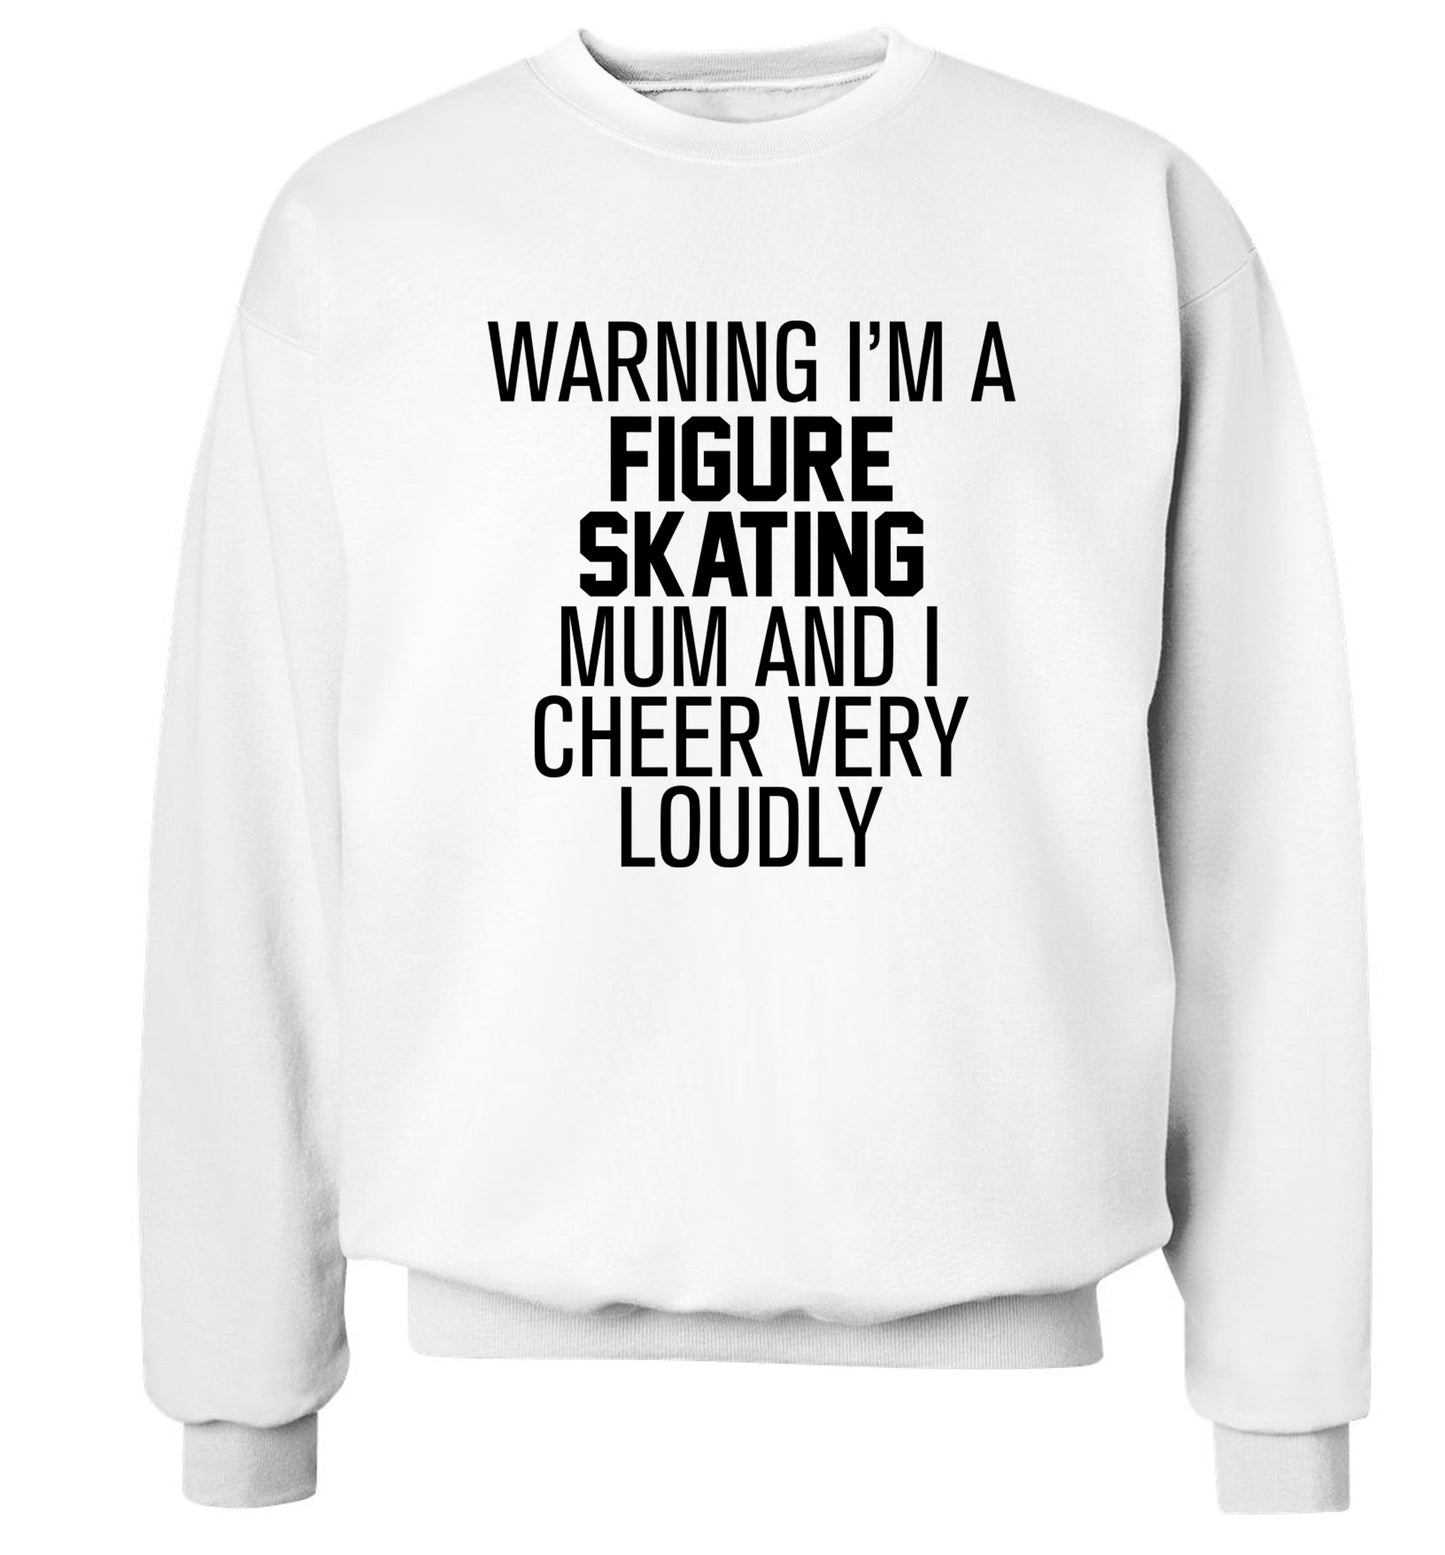 Warning I'm a figure skating mum and I cheer very loudly Adult's unisexwhite Sweater 2XL